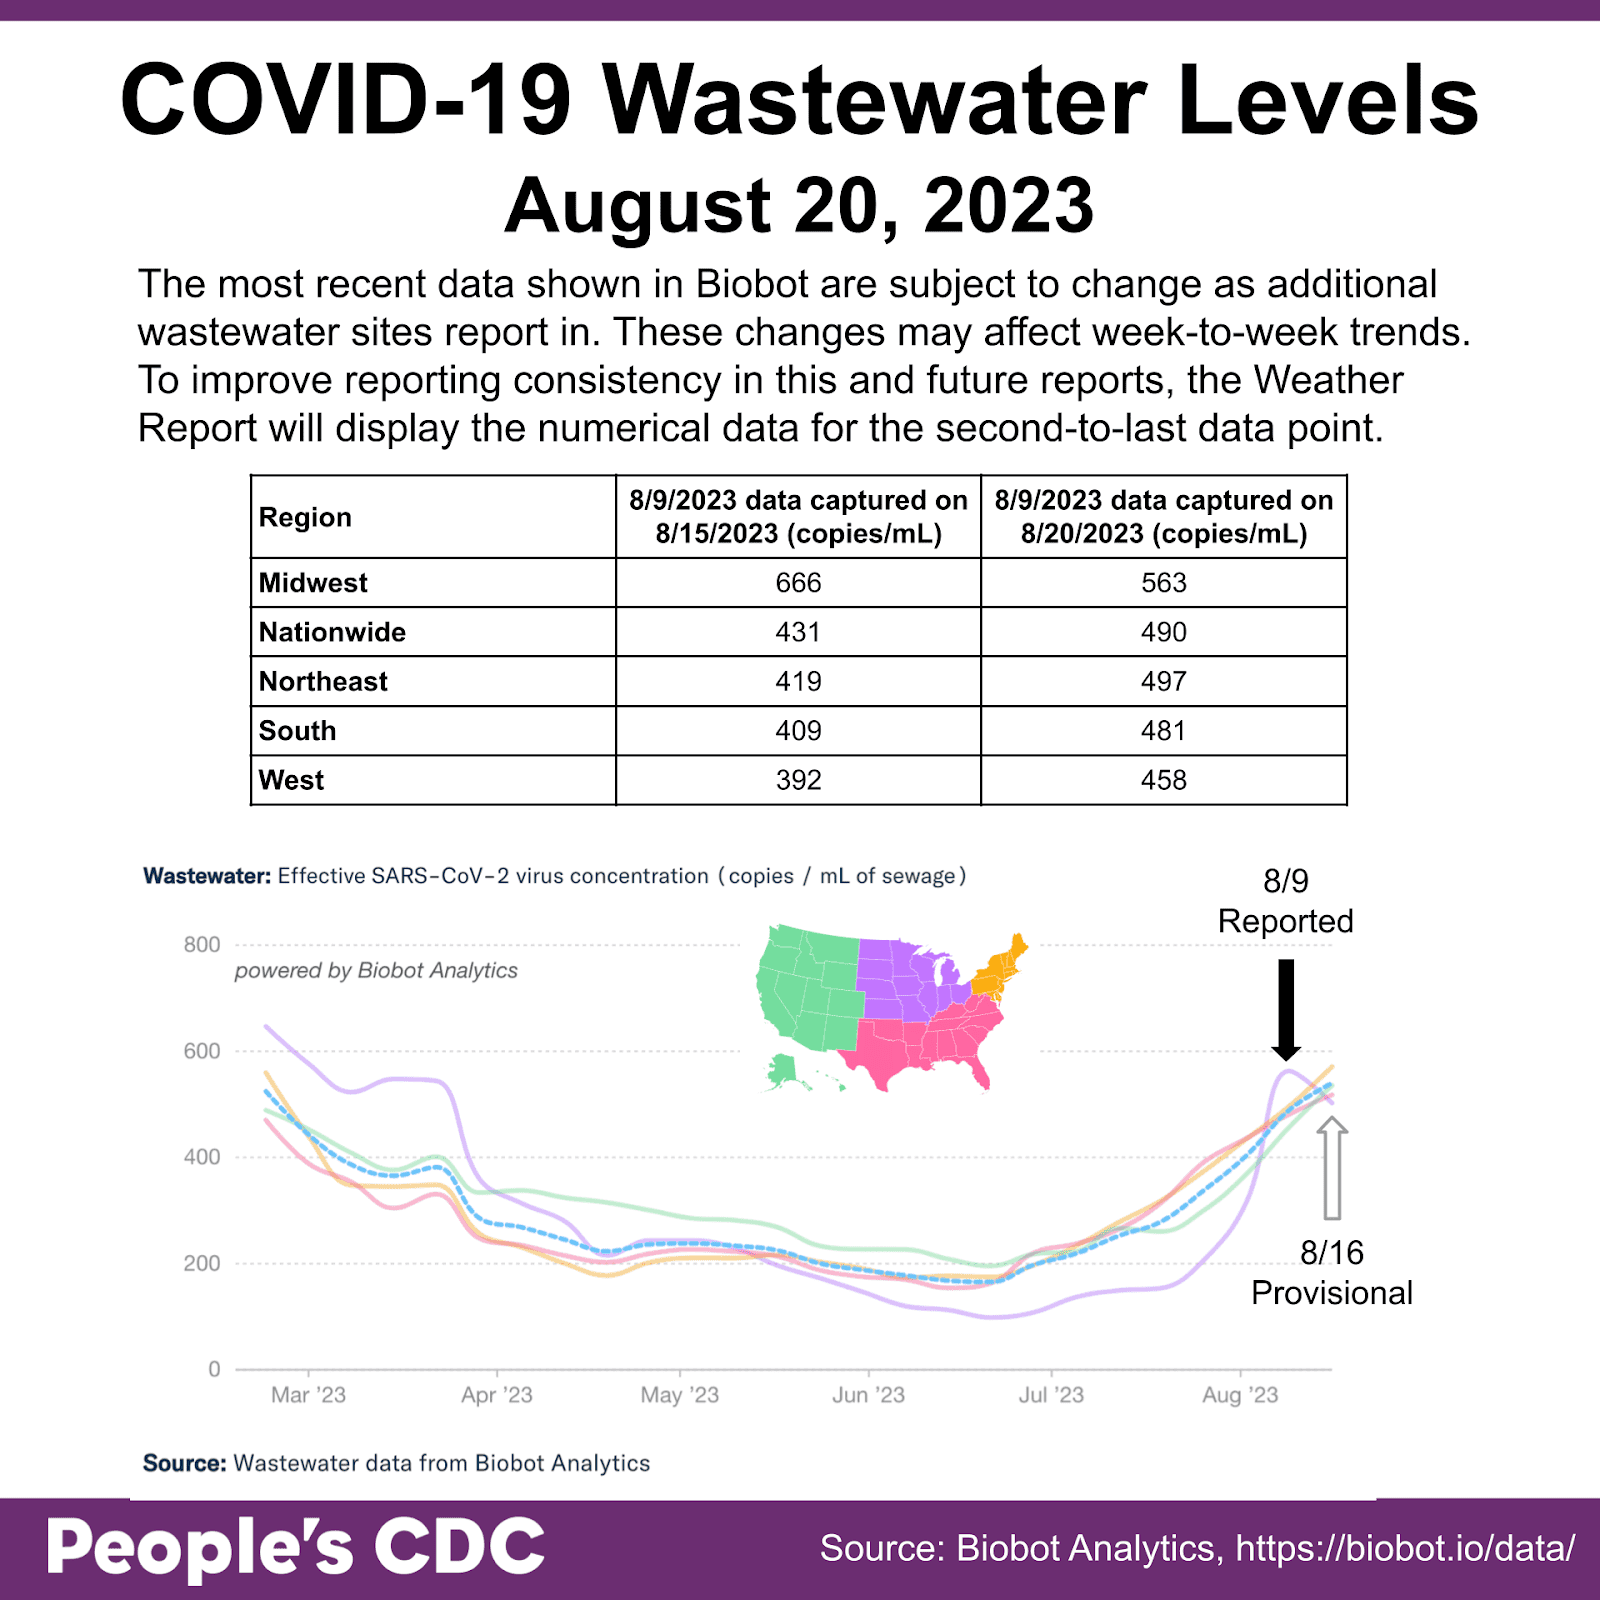 Title reads “COVID-19 Wastewater Levels August 20, 2023.” Text box reads: “The most recent data shown in Biobot are subject to change as additional wastewater sites report in. These changes may affect week-to-week trends. To improve reporting consistency in this and future reports, the Weather Report will display the numerical data for the second-to-last data point.” There is a table of data of viral copies per mL from 8/9/23, as it was captured on both 8/15 and 8/20/23 each shown by region. The Midwest numbers are the highest (666 and 563 for respective dates of data capture), followed by nationwide (431 and 490), Northeast (419 and 497), South (409 and 481), and West (392 and 458). A map of the United States below the table shows the West is green, Midwest is purple, South is pink, and Northeast is orange. A line graph on the bottom is titled “Wastewater: Effective SARS-CoV-2 virus concentration (copies/mL of sewage),” from Mar 2023 through Aug 2023. The line graph shows X-axis labels March ‘23 to Aug ‘23 with regional virus concentrations showing a decrease in all regions from March to mid-June, but rising from mid June to August nationwide. The Midwest shows a spike as of 8/9 reported data (shown with a black arrow), but returns to a value on par with other regions as of 8/16 provisional data (shown with white arrow).